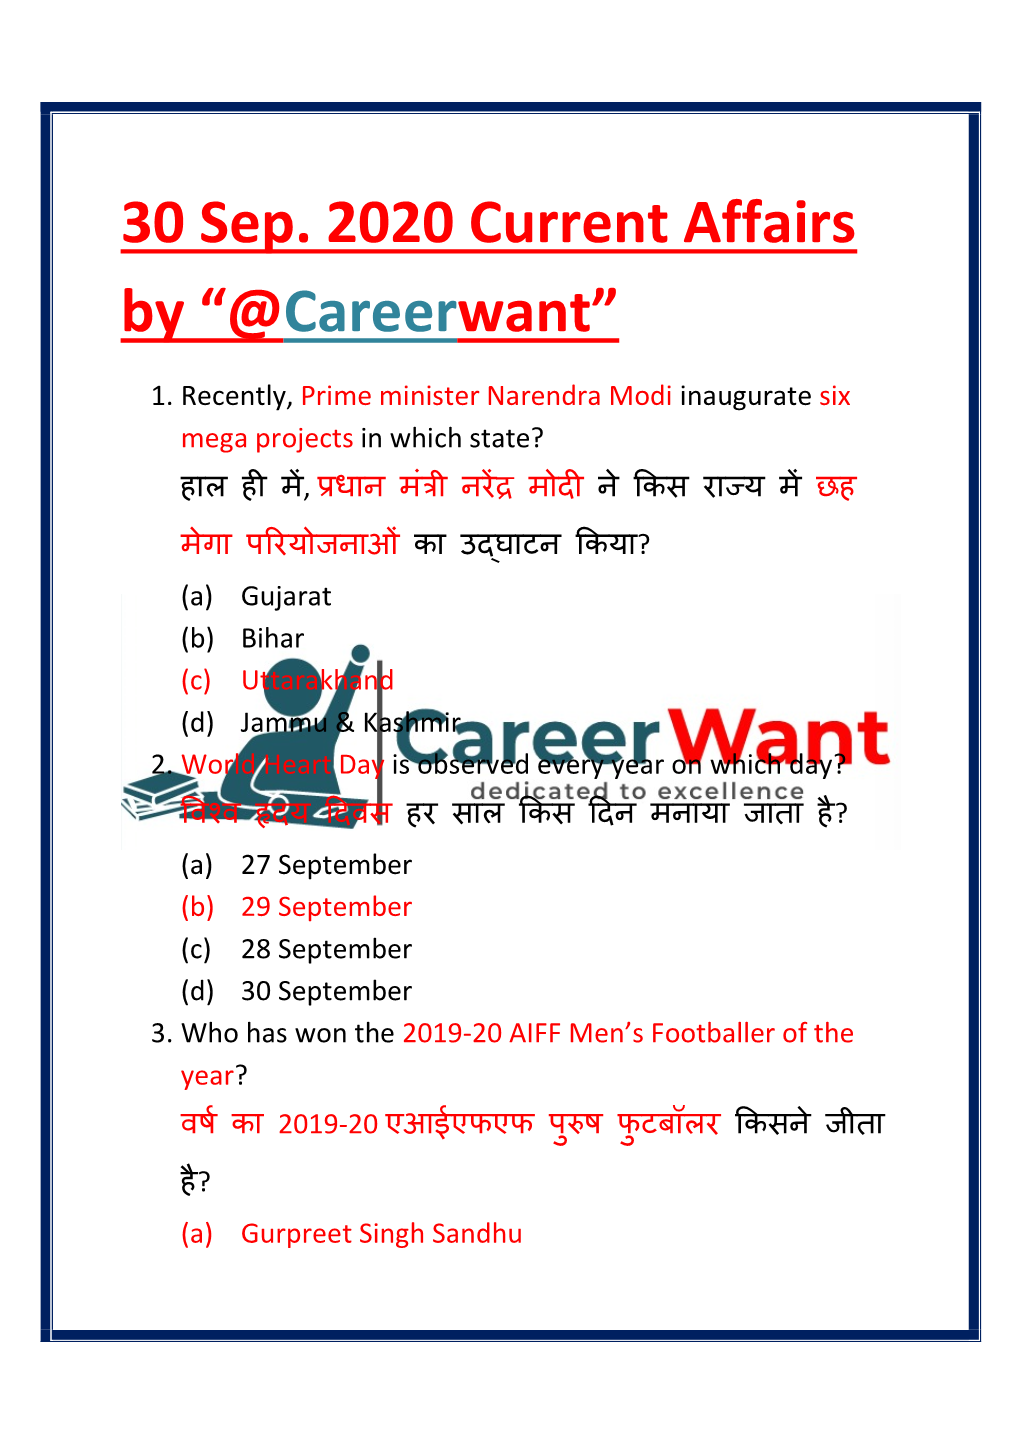 30 Sep. 2020 Current Affairs by “@Careerwant”